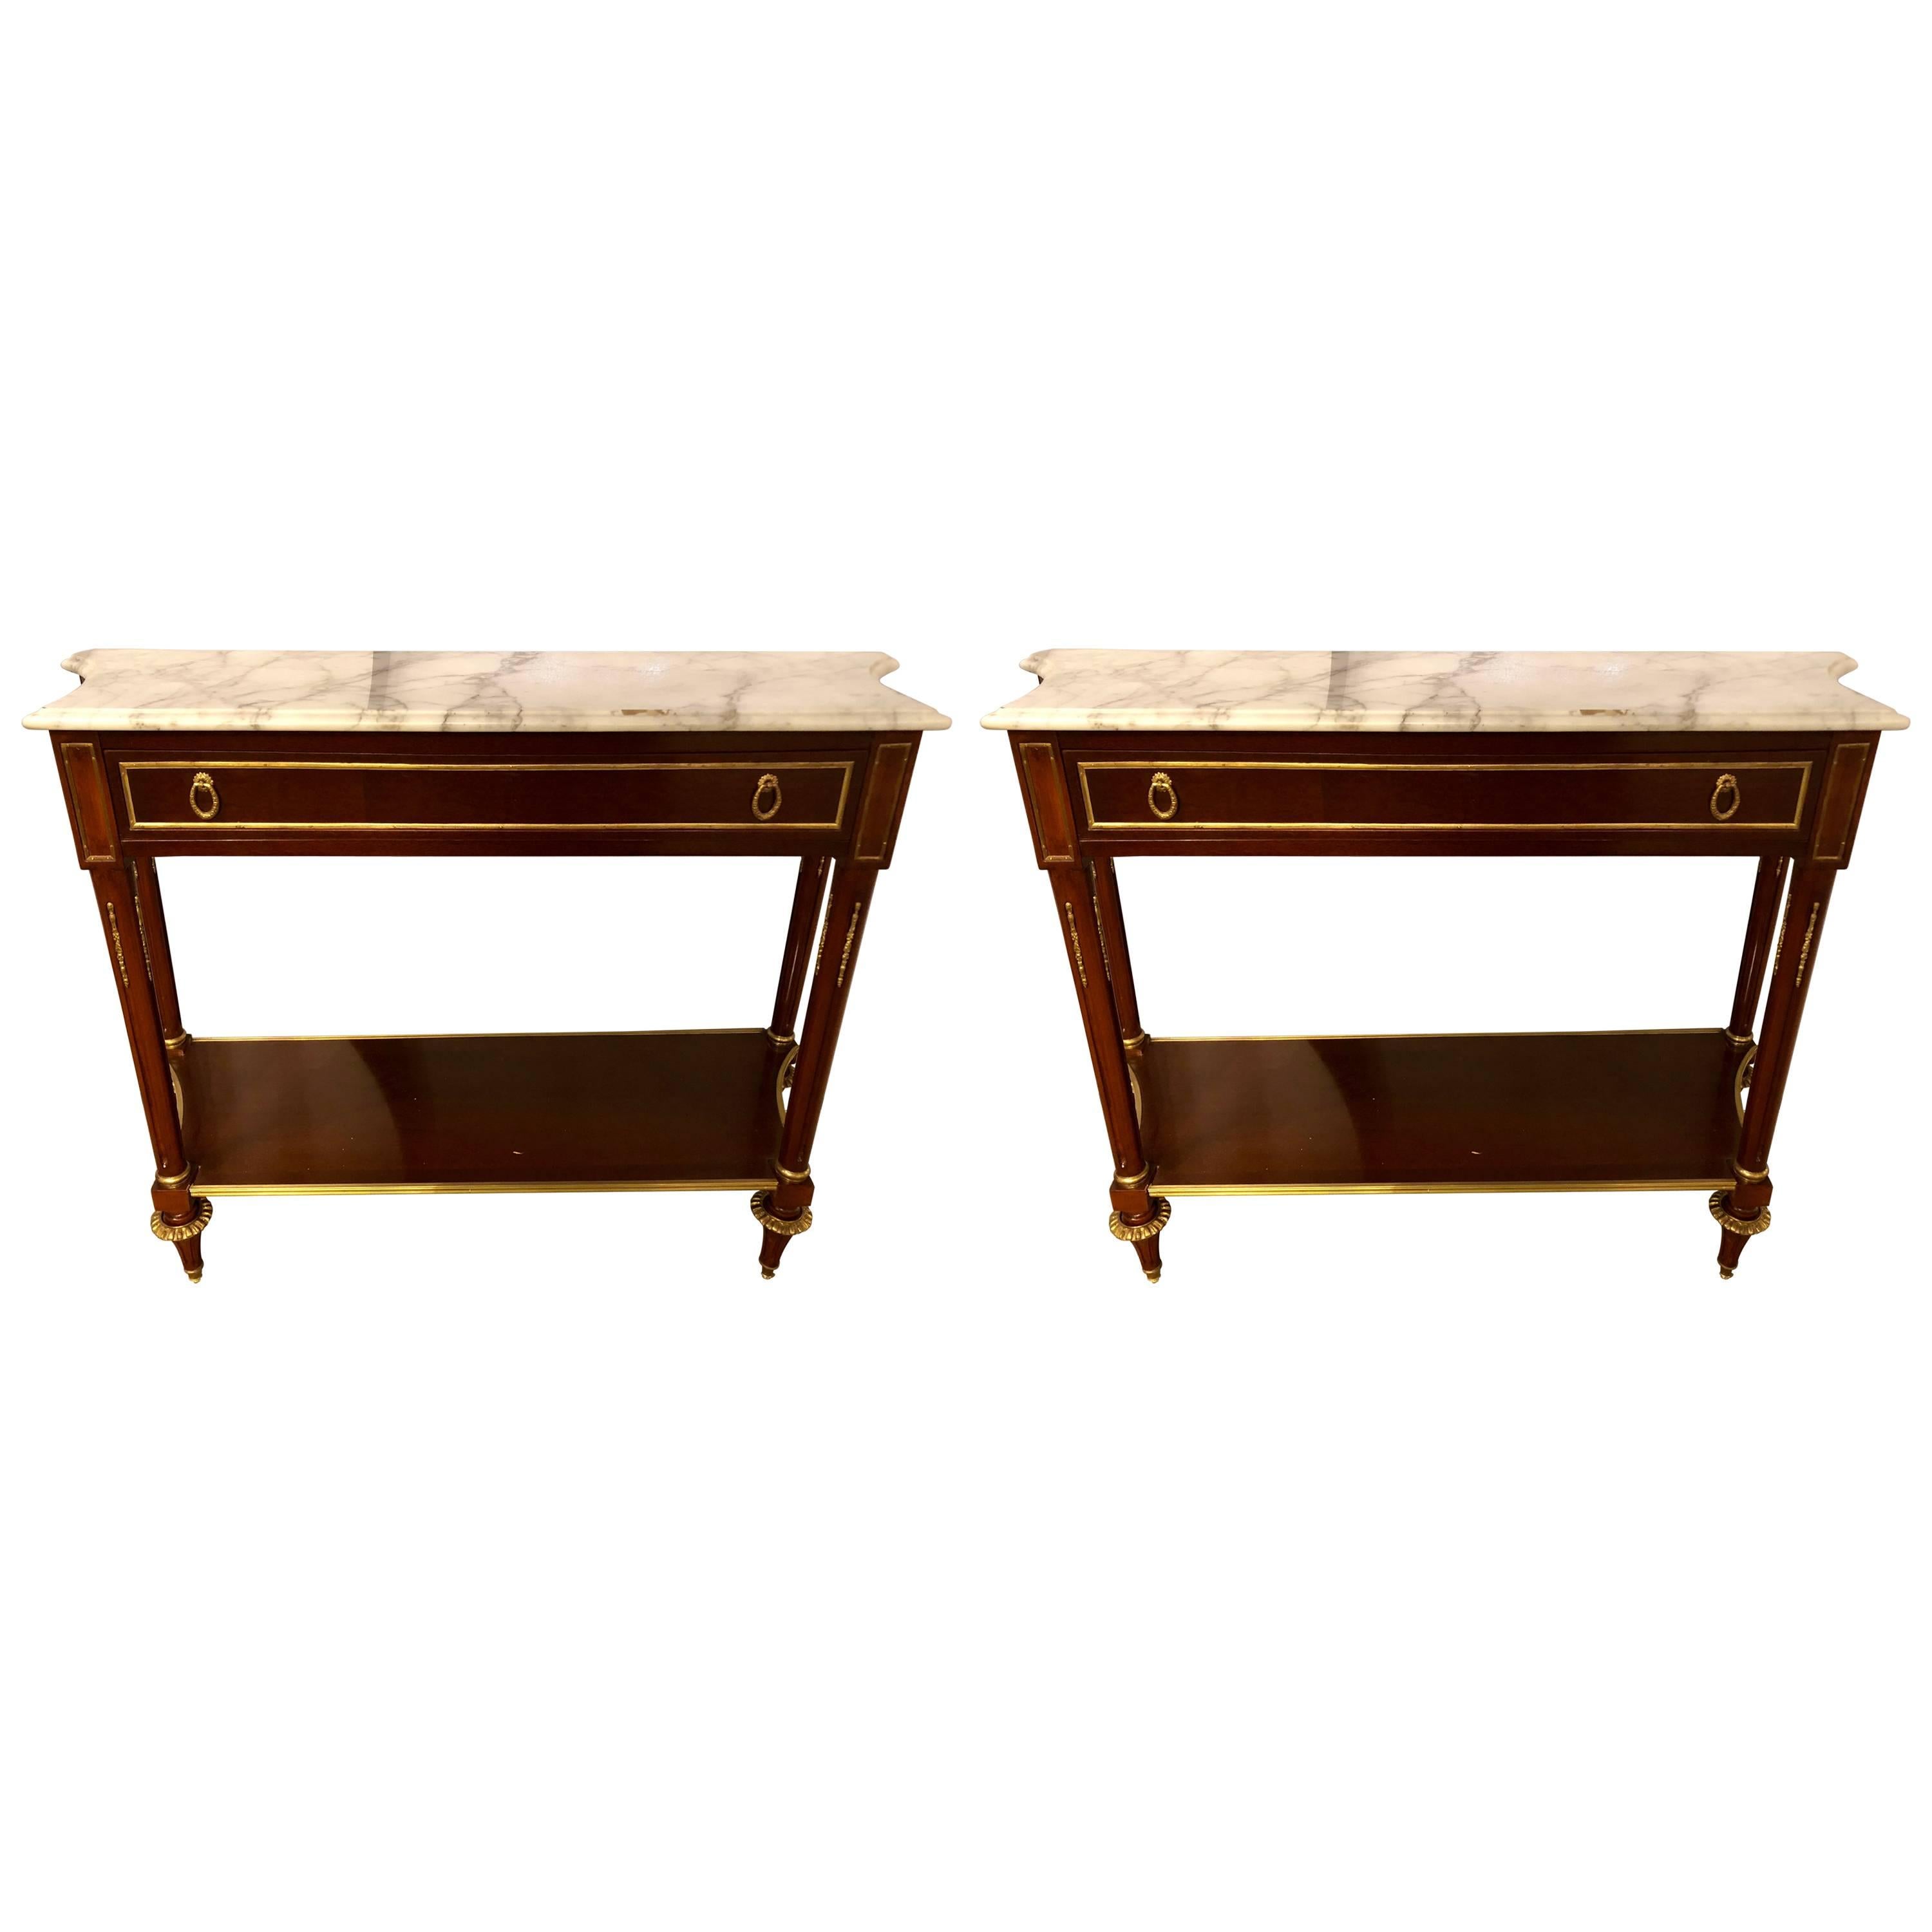 Pair of Louis XVI Style Mahogany Consoles Fashioned after Maison Jansen